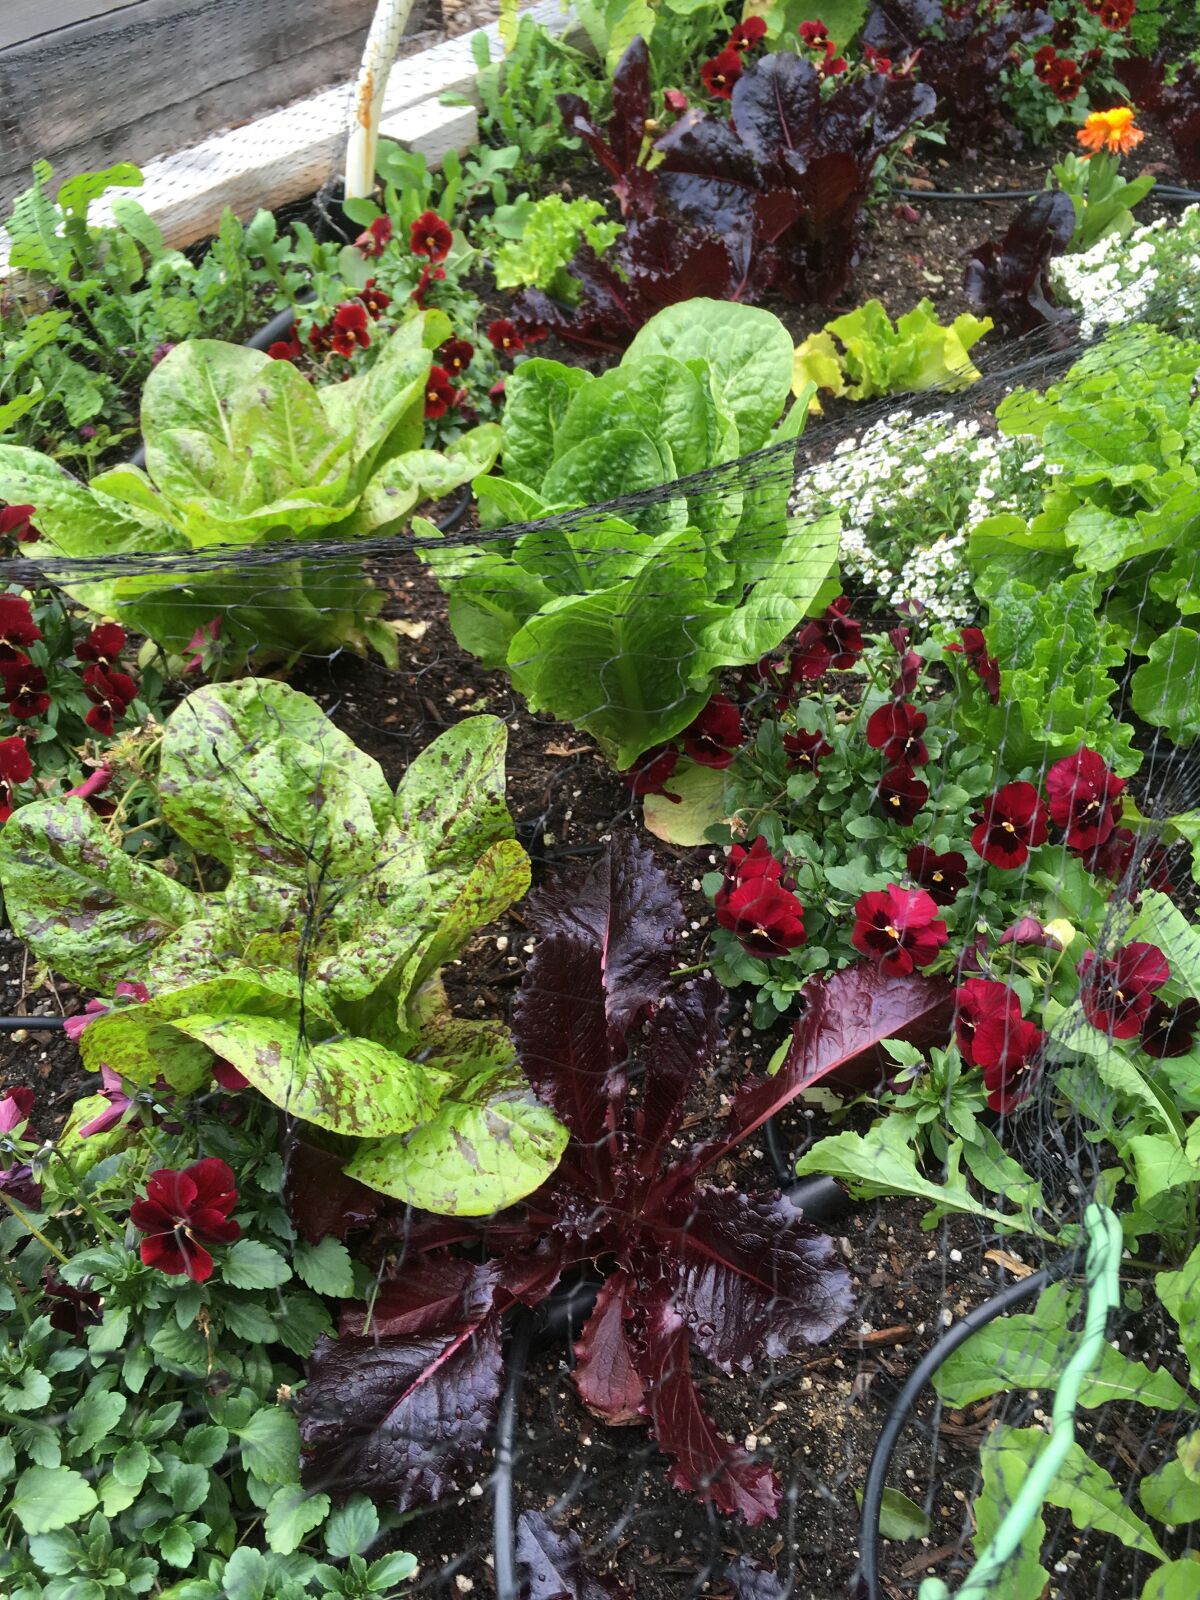 Edible flowers planted throughout a bed of lettuce attract beneficial insects and help control garden pests.